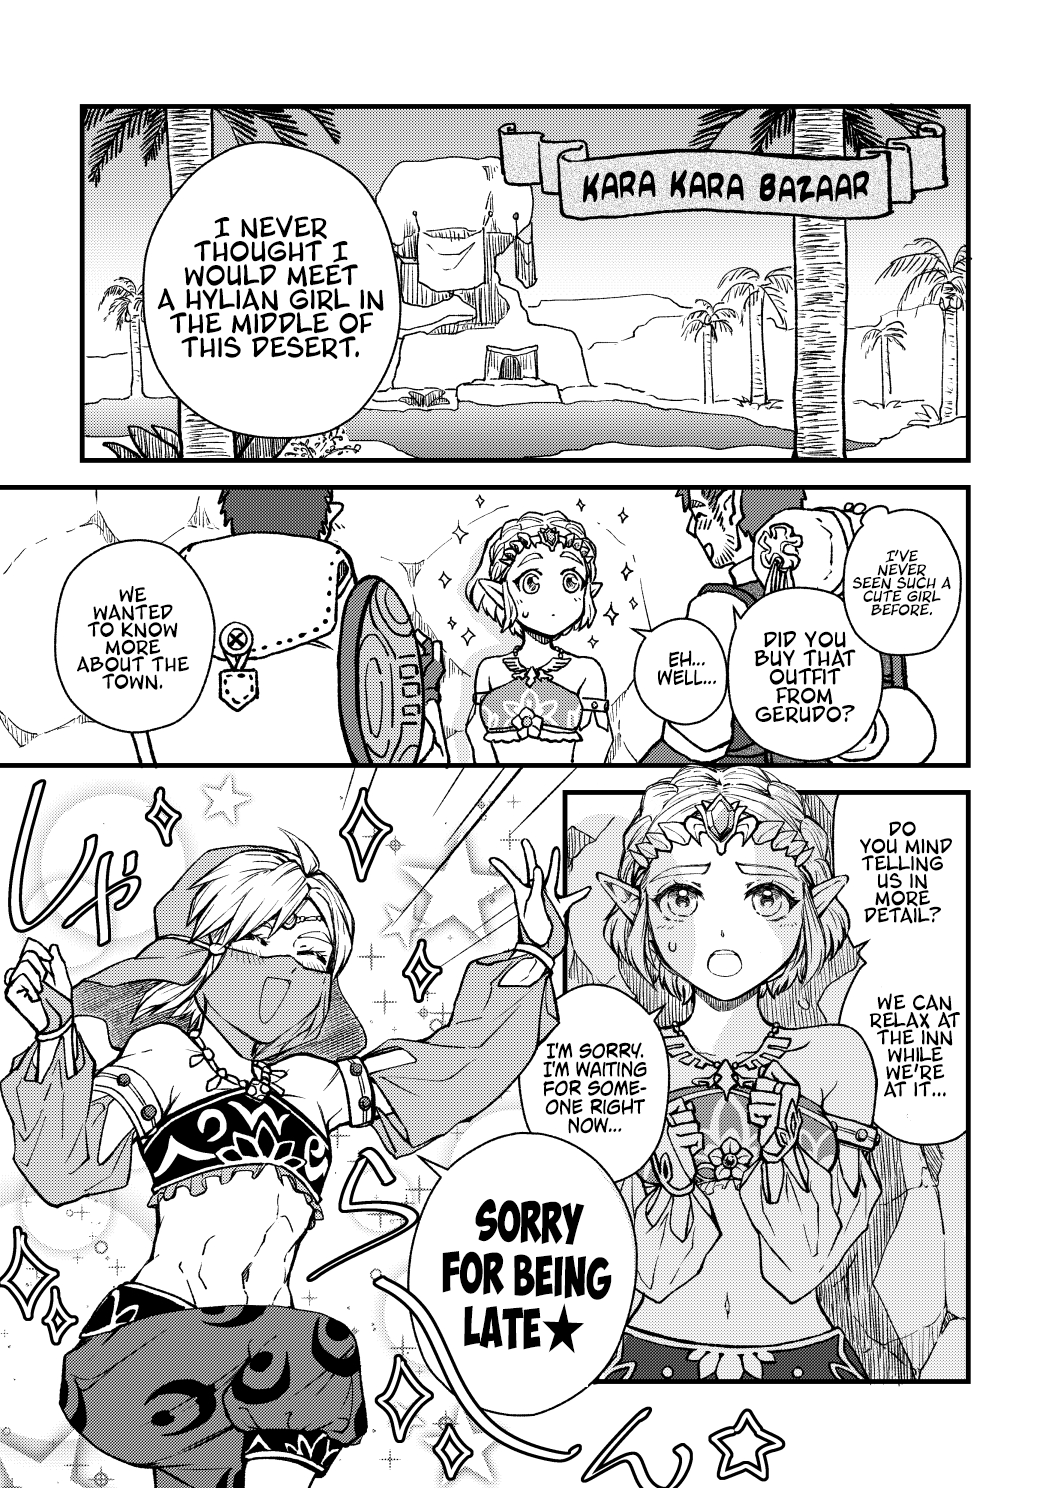 DISC] The Legend of Zelda: Breath of the Wild - I Know About a Store in  Gerudo Town that Sells a White Outfit (Doujinshi/Oneshot) : r/manga